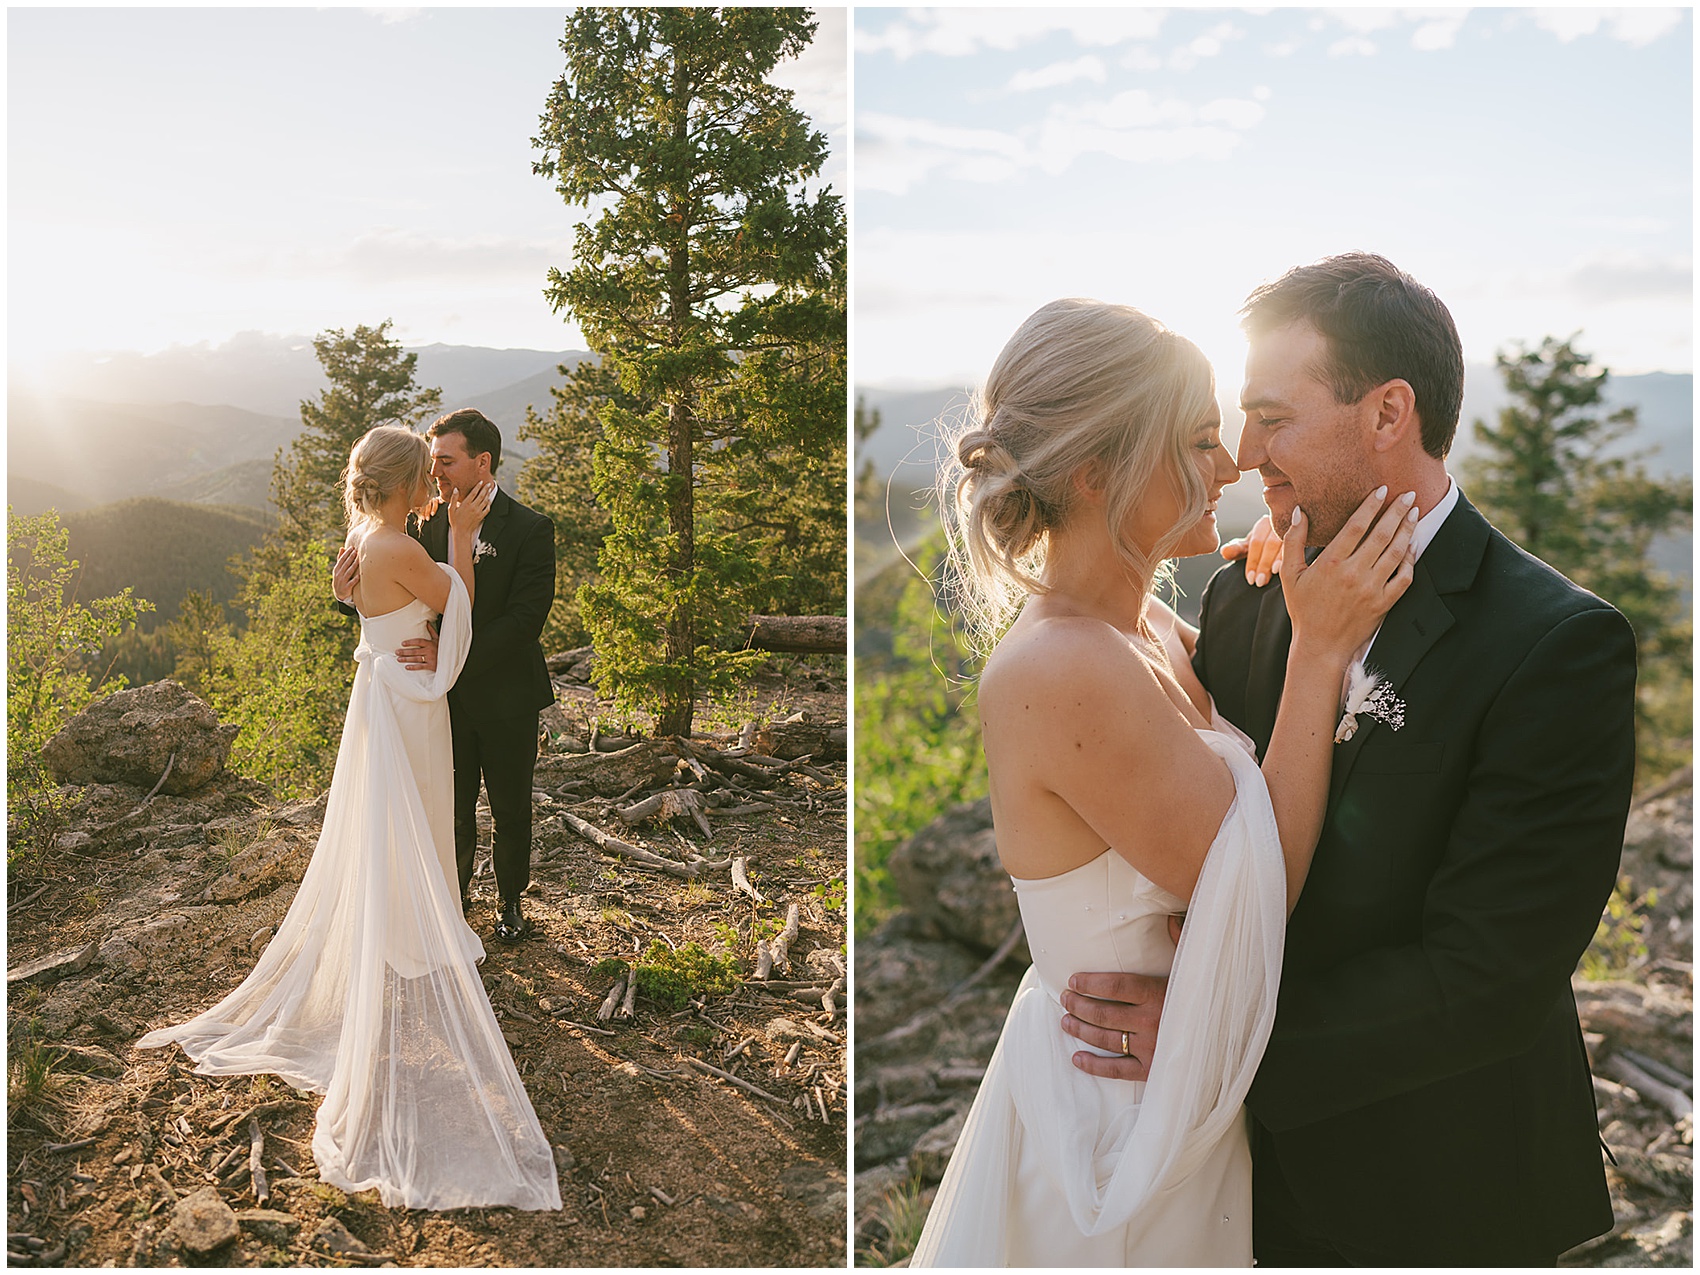 Newlyweds touch noses while holding each other at sunset on a mountain trail